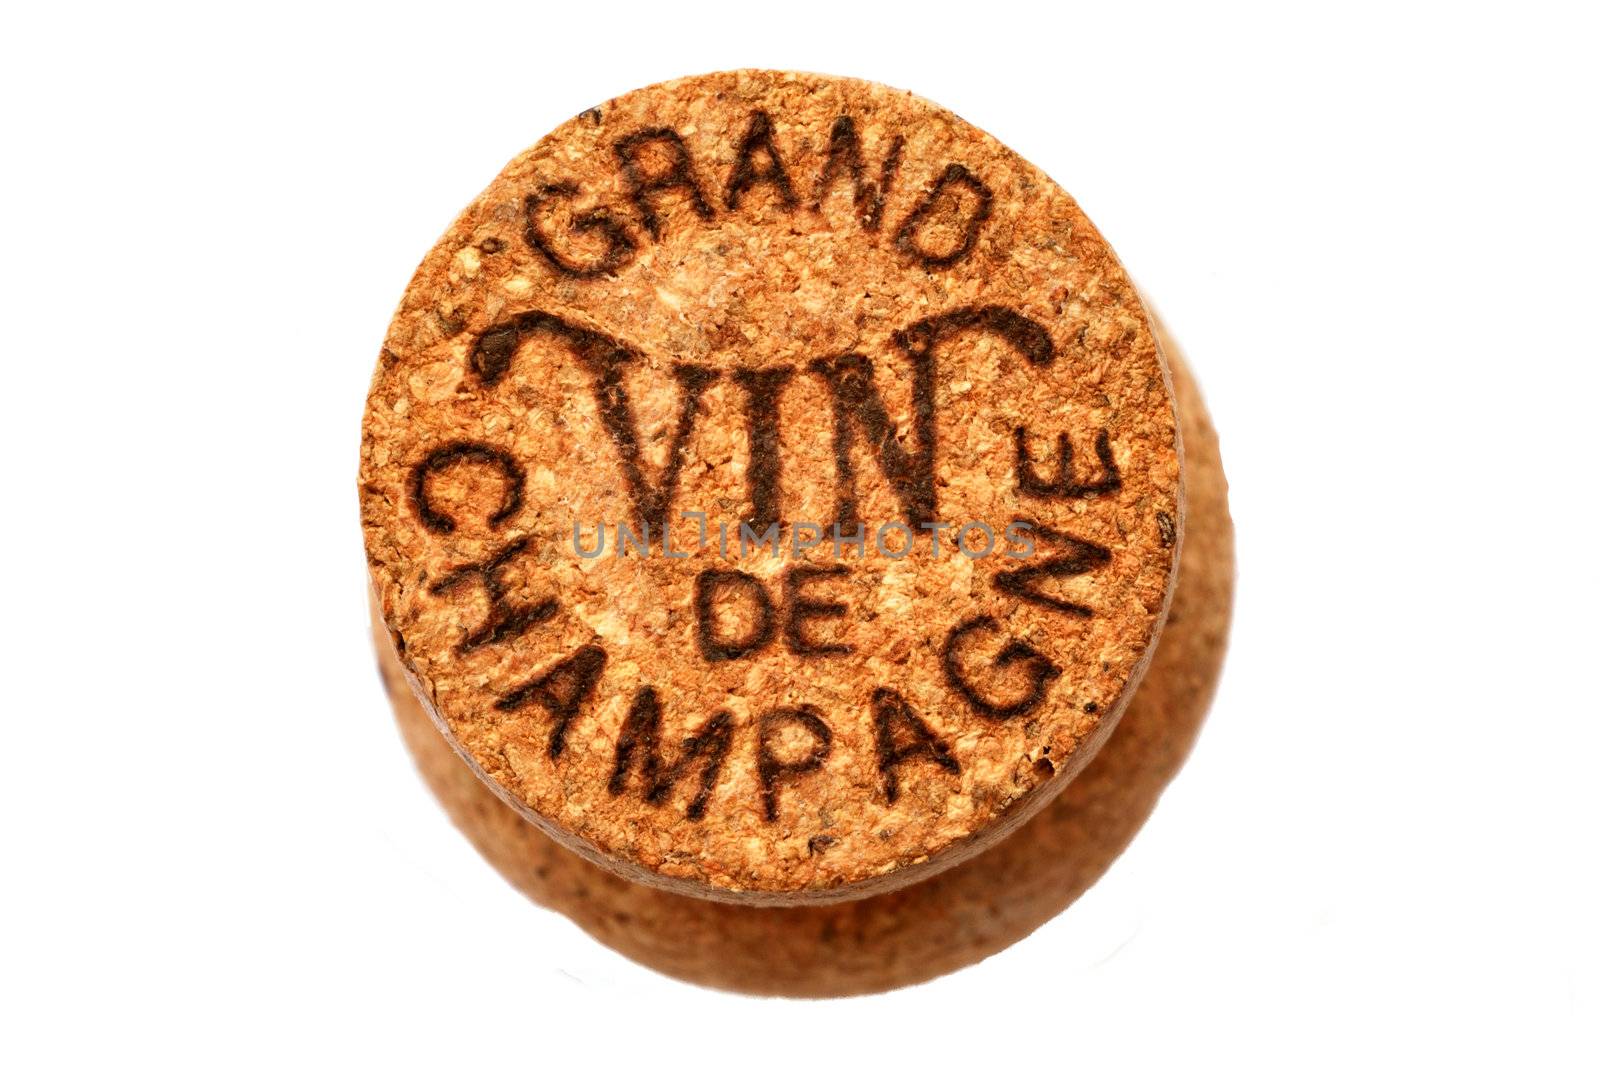 Champagne cork end on